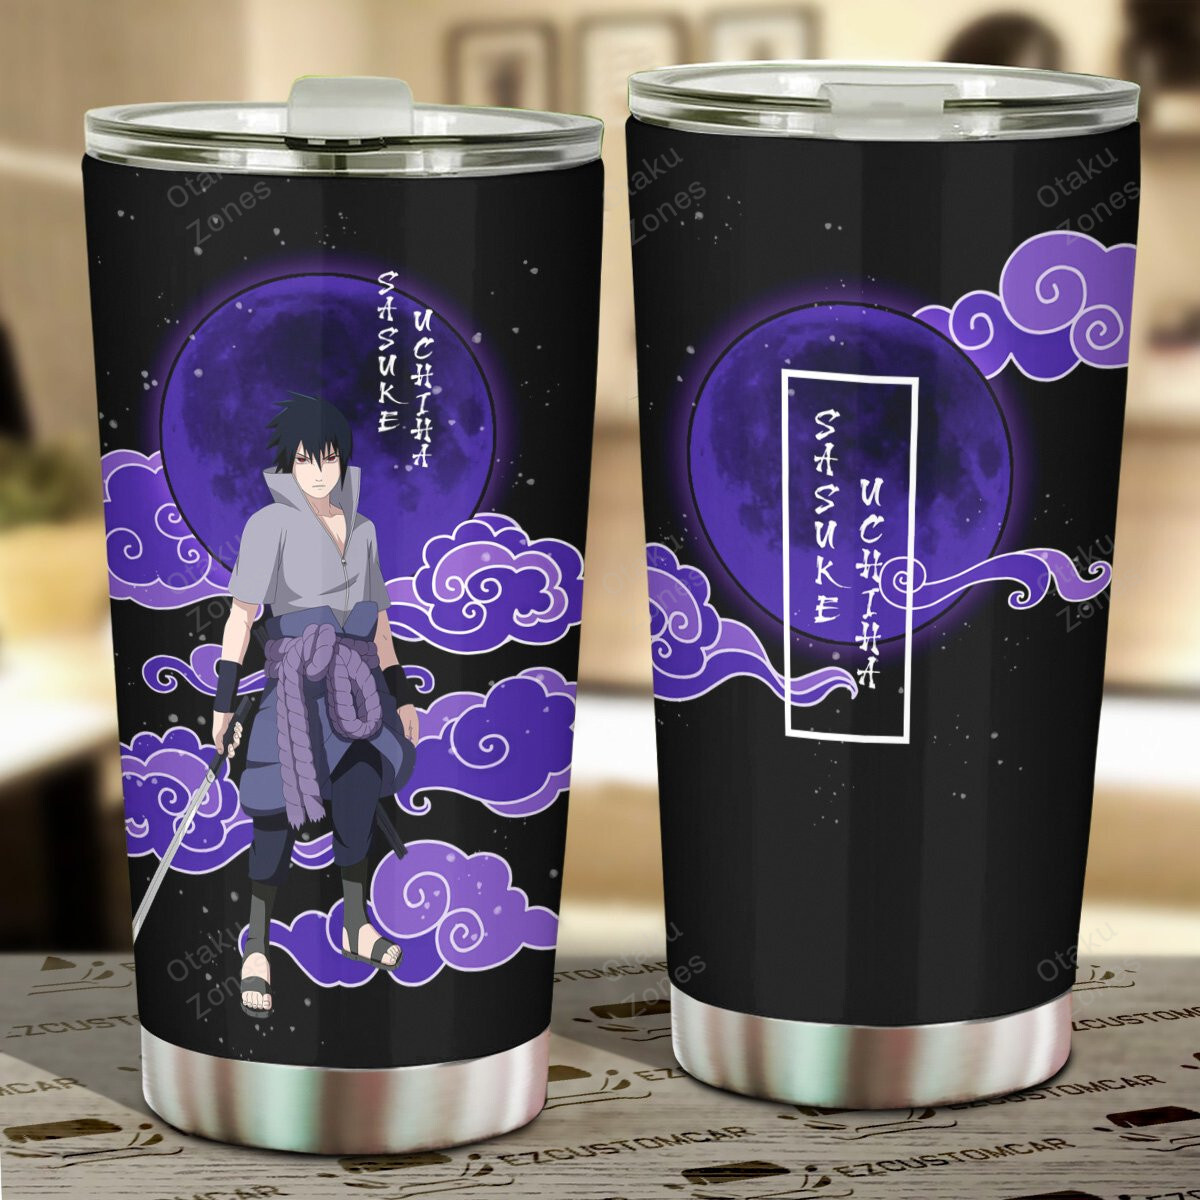 Go ahead and order your new tumbler now! 17